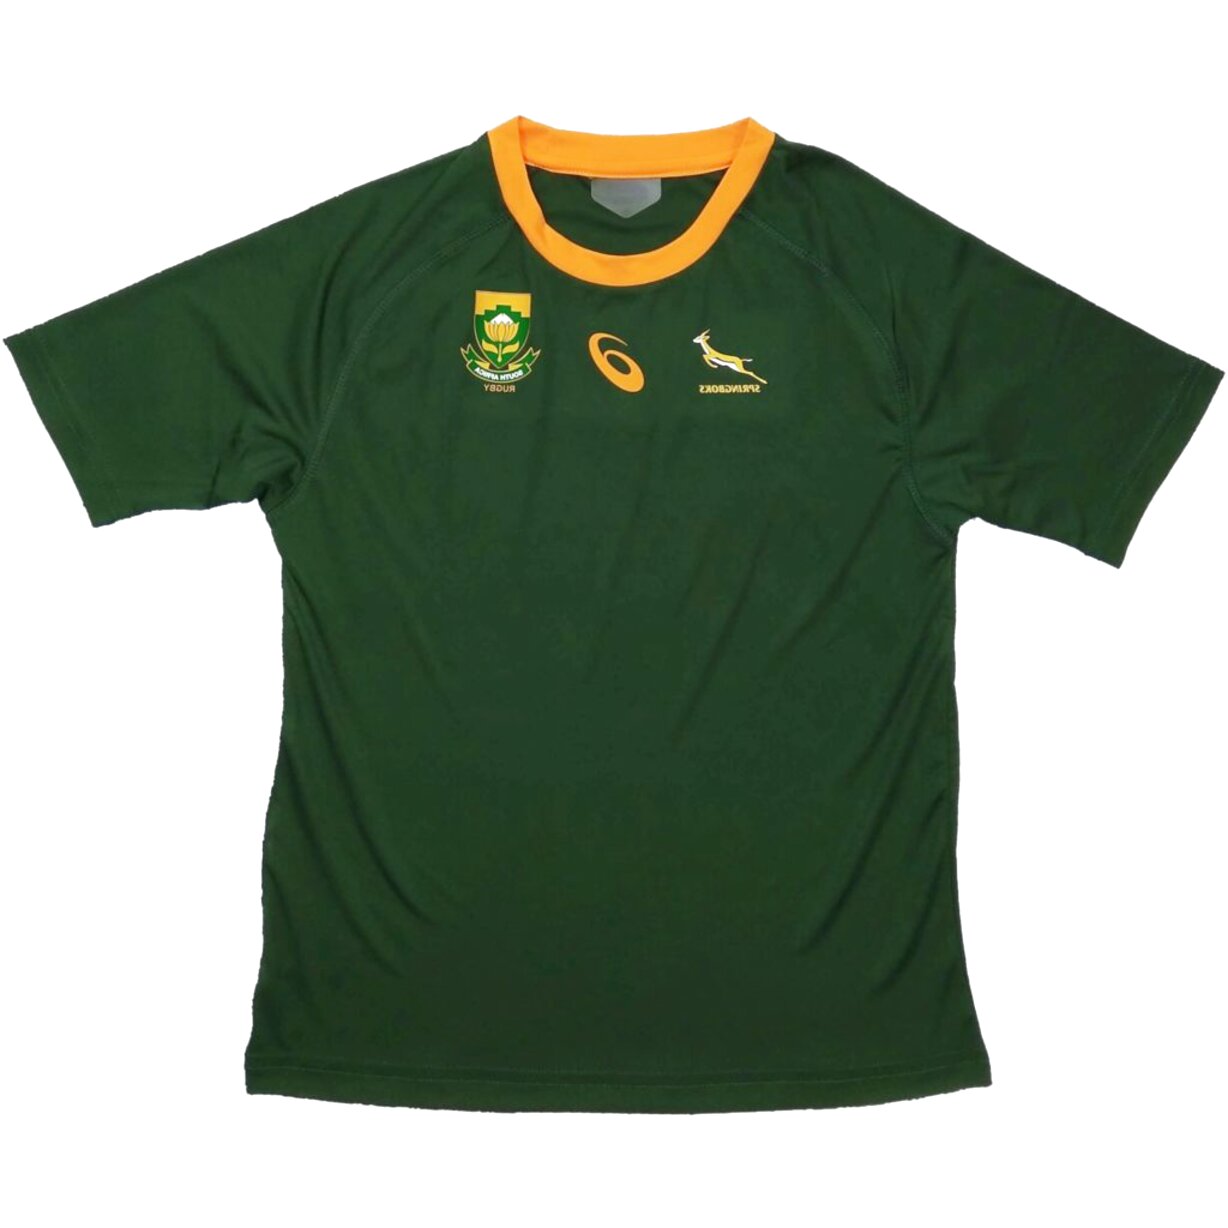 Springbok Rugby Jersey for sale in UK | 54 used Springbok Rugby Jerseys